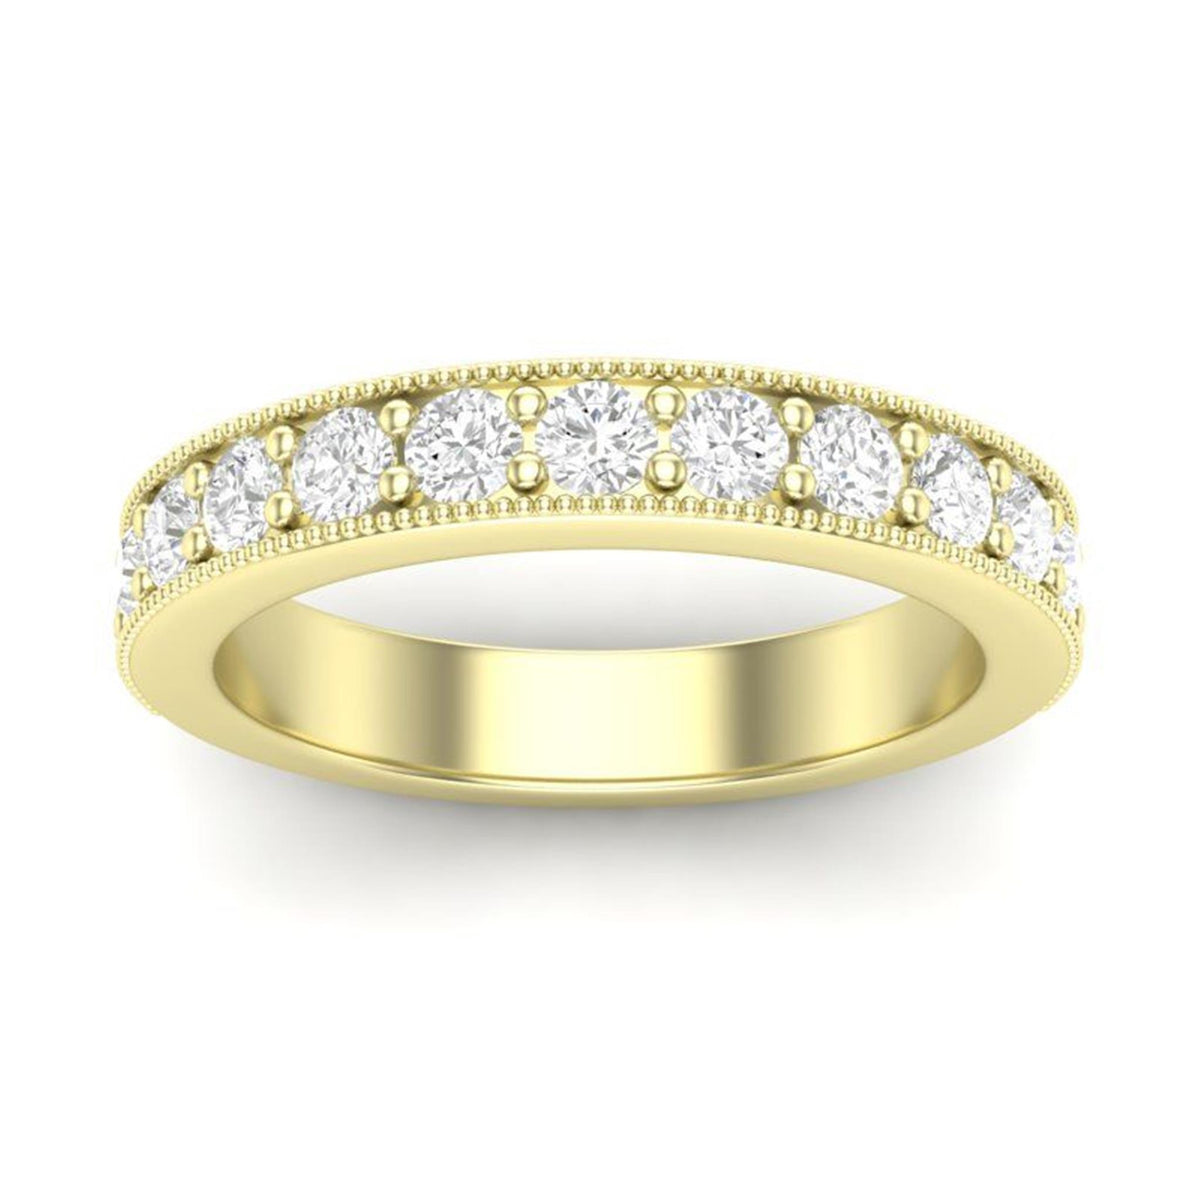 14Kt Yellow Gold Vintage Inspired Ring With .75cttw Natural Diamonds